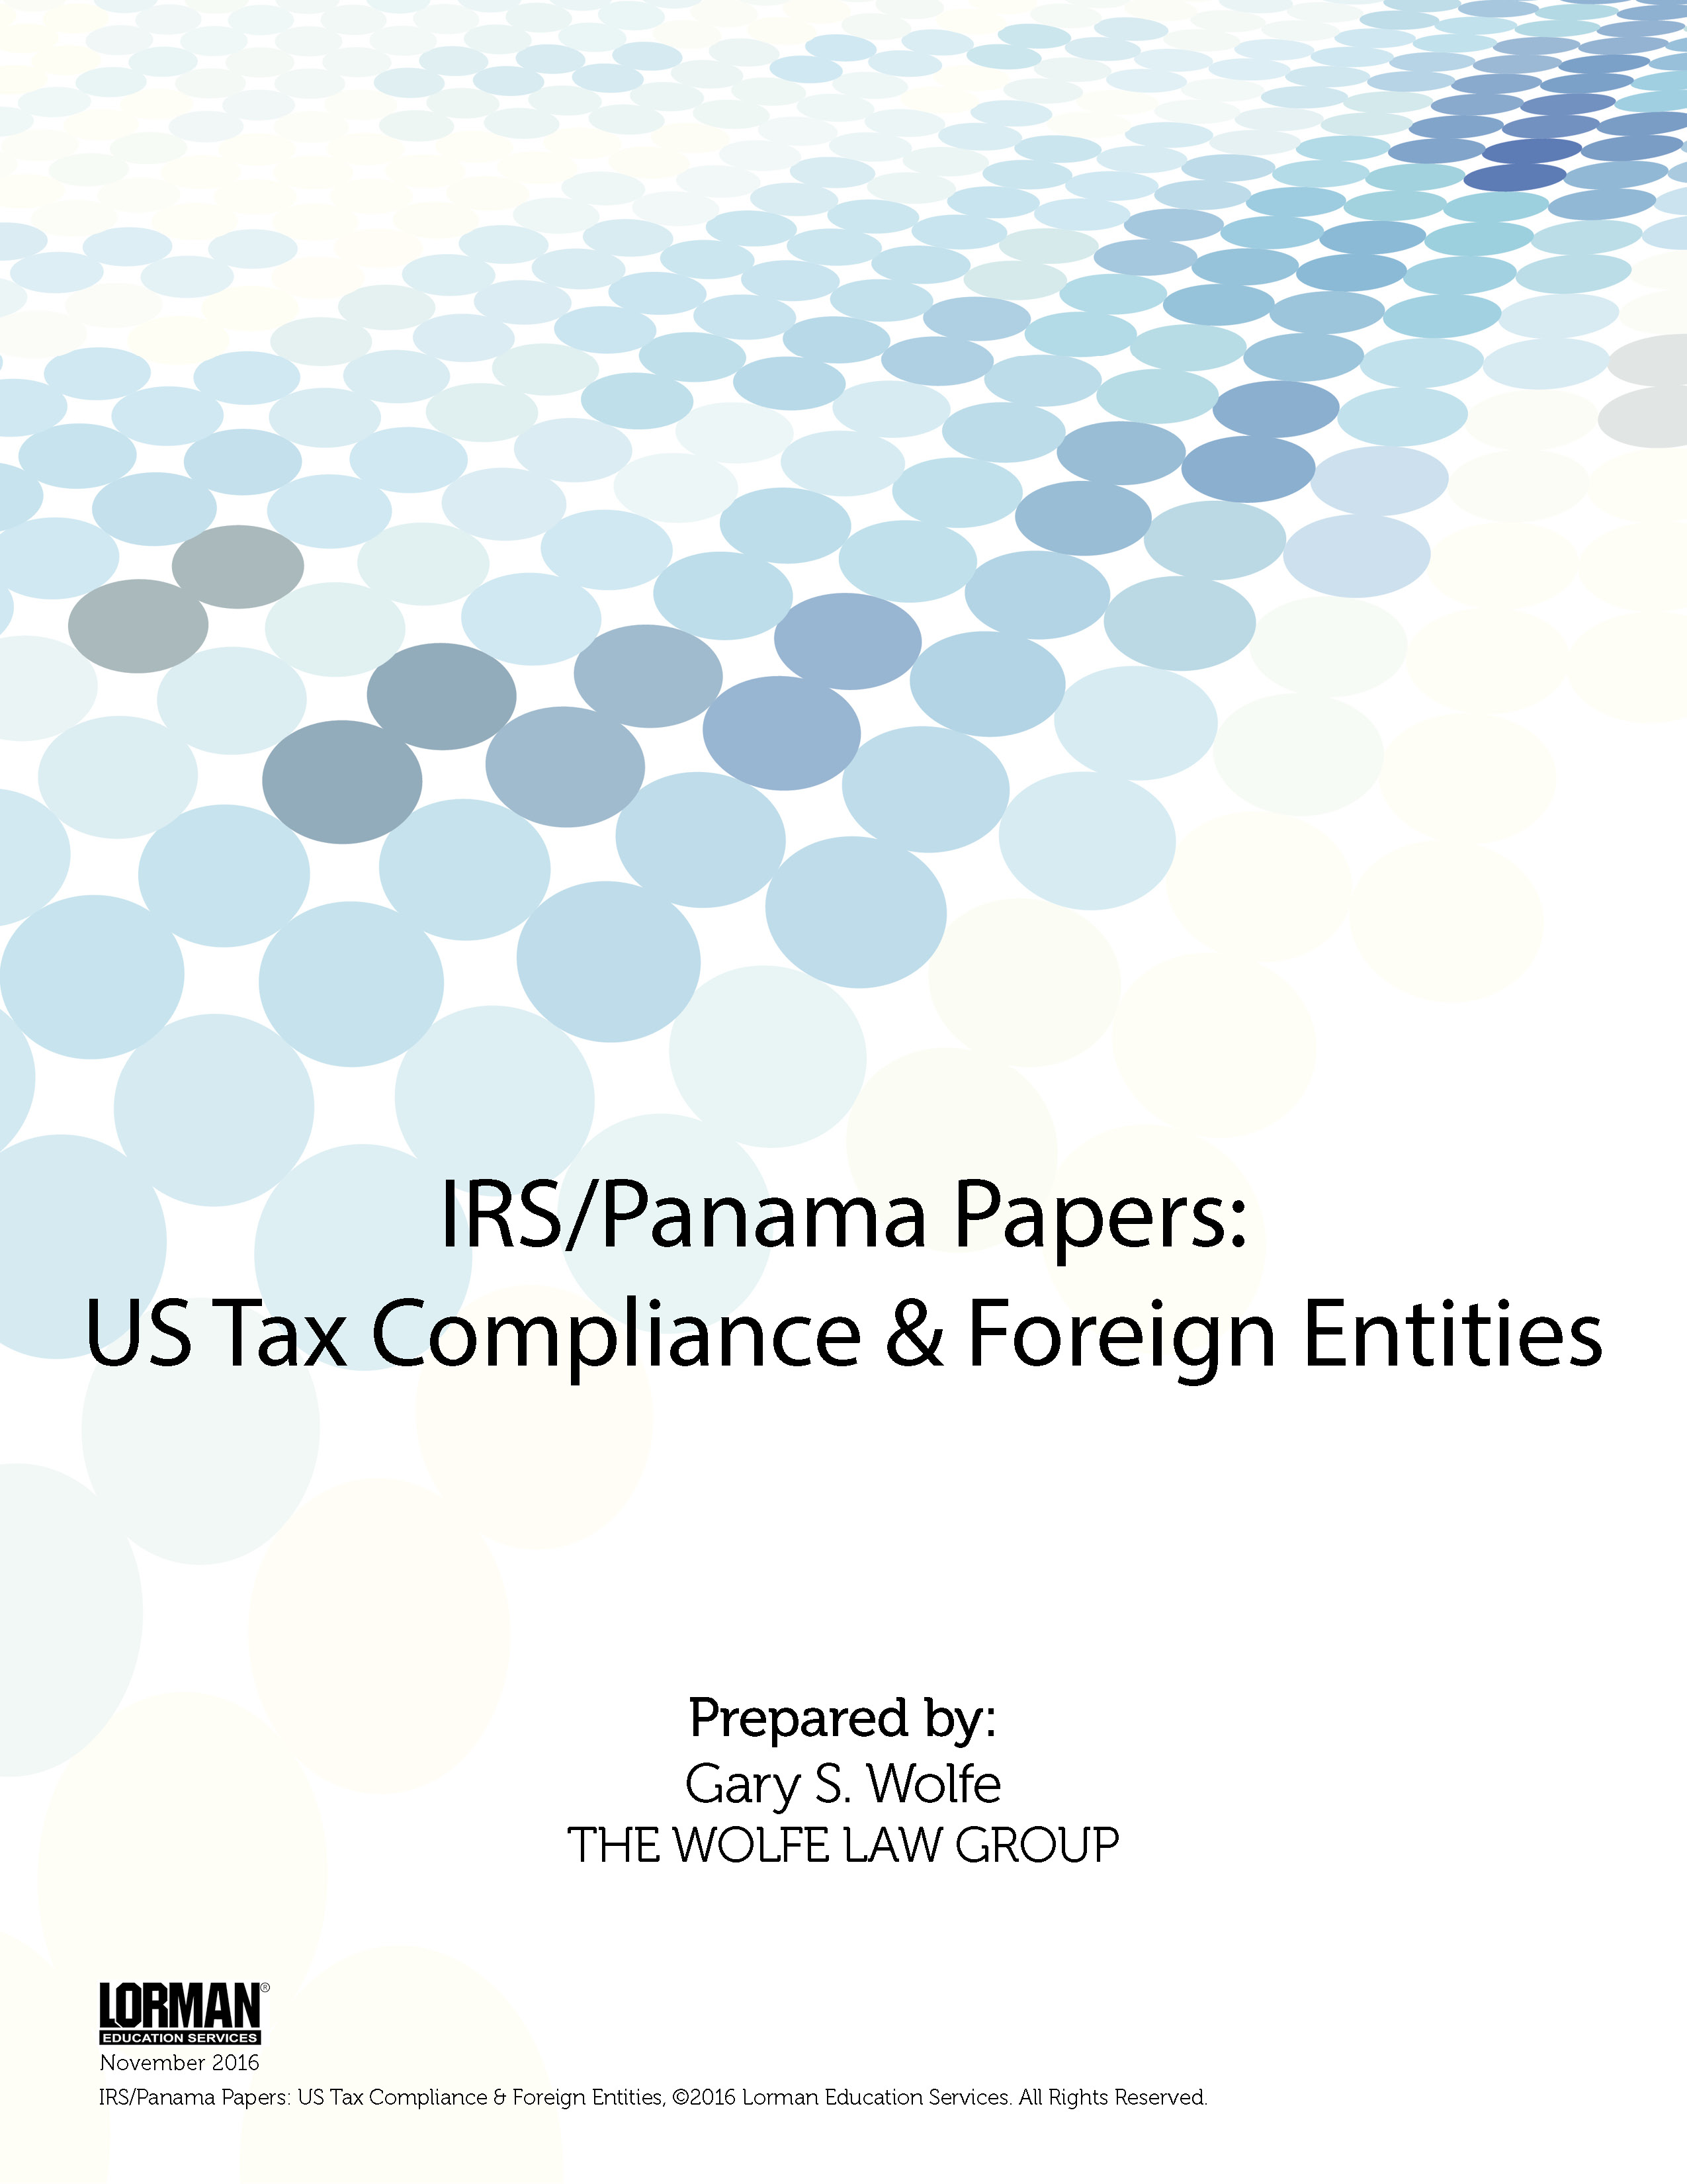 IRS-Panama Papers: US Tax Compliance and Foreign Entities